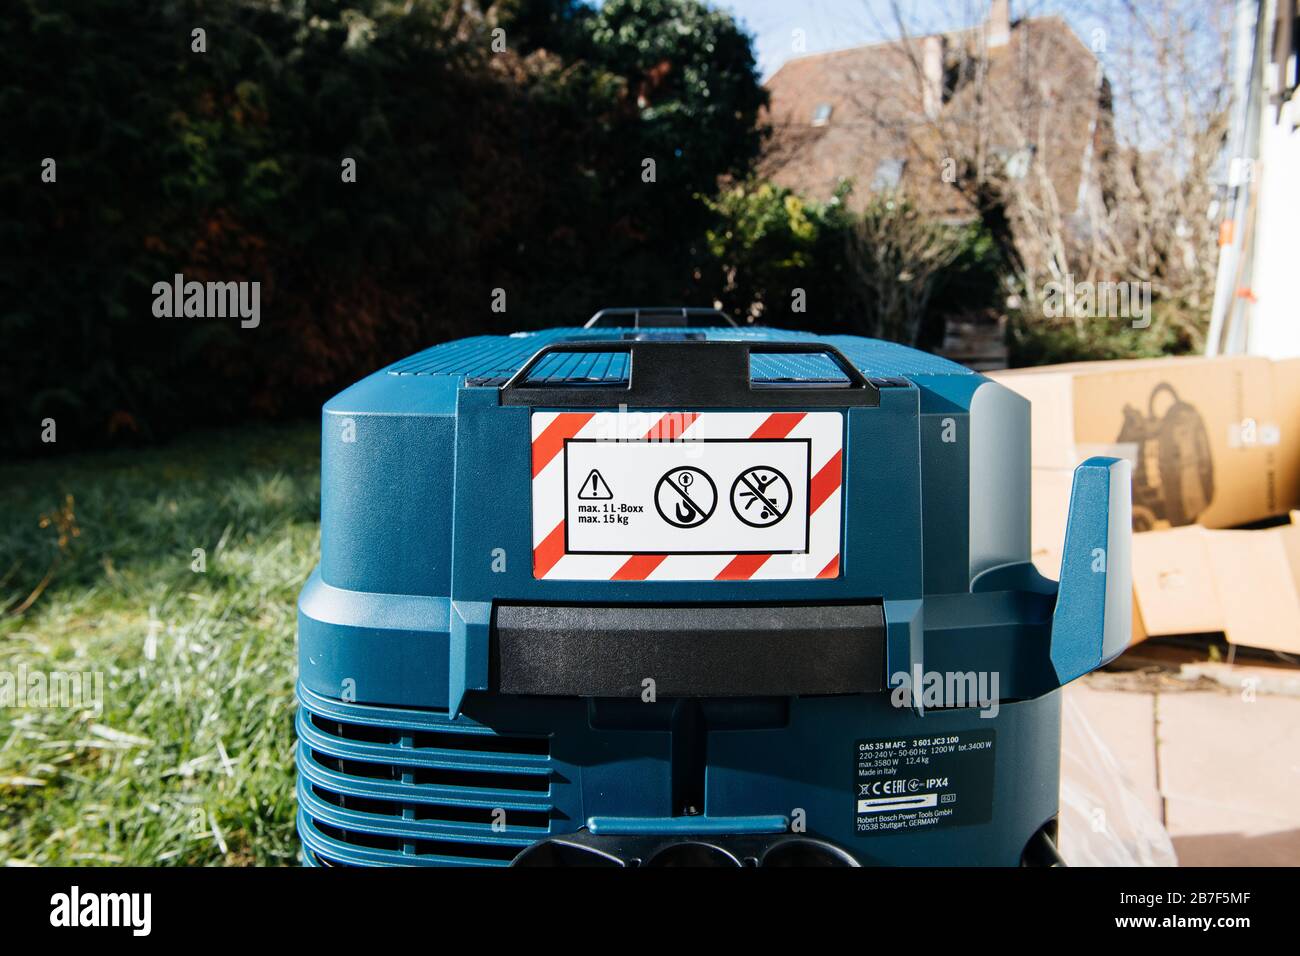 https://c8.alamy.com/comp/2B7F5MF/strasbourg-france-feb-9-2020-warning-with-1-l-boxx-and-maxim-15-kg-load-on-top-of-new-bosch-gas-35-m-afc-professional-wet-and-dry-vacuum-cleaner-35-l-with-automatic-filter-cleaning-dust-class-m-2B7F5MF.jpg